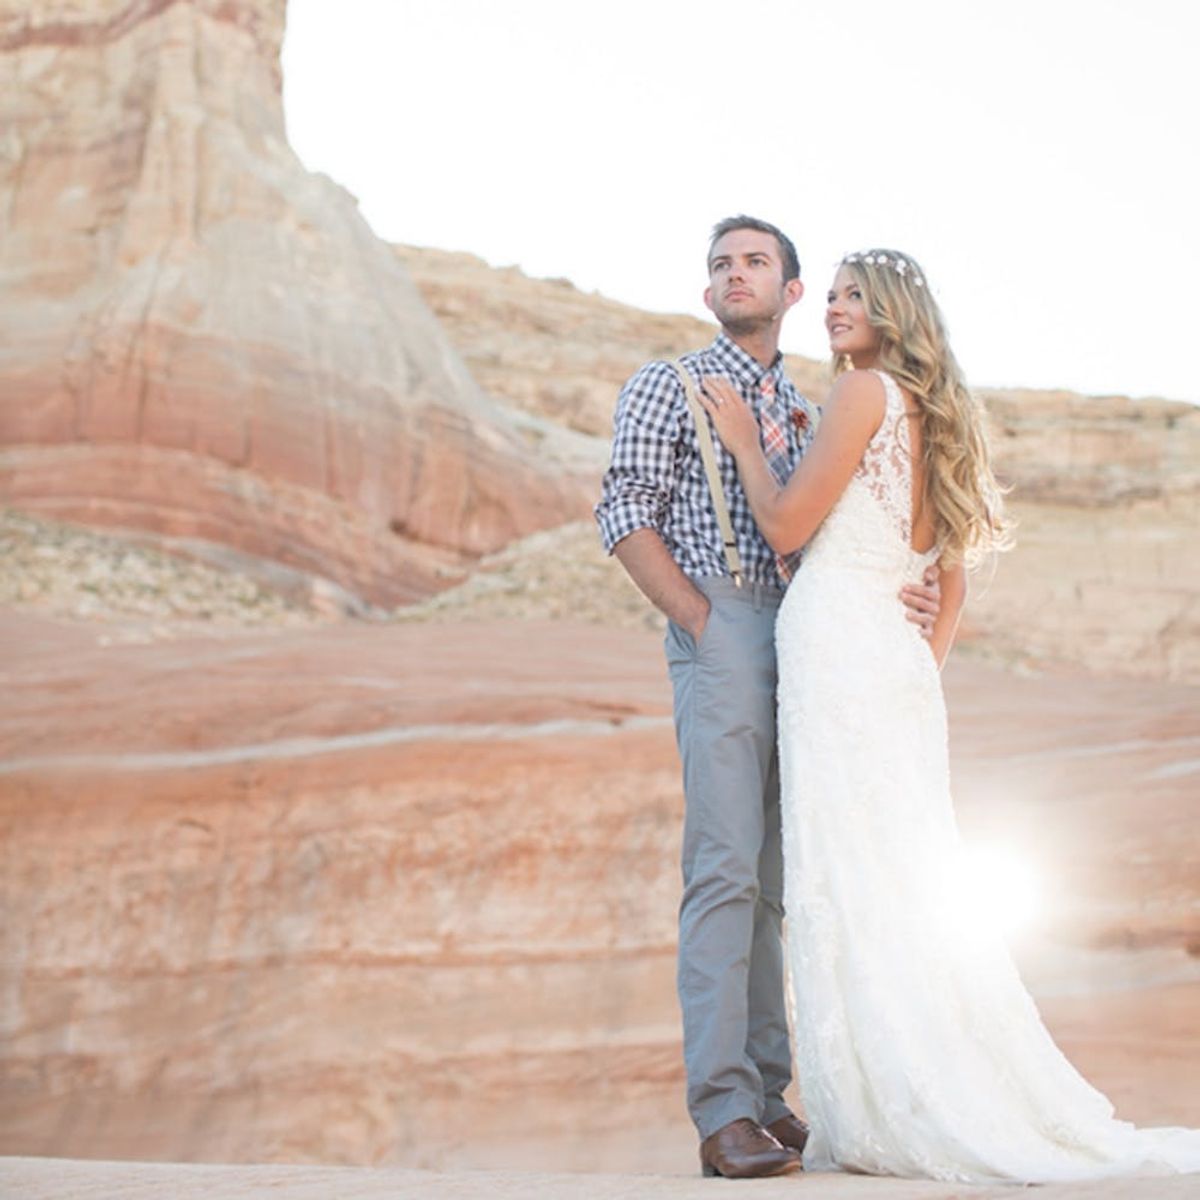 This Is What a Wedding in the Desert Should Look Like